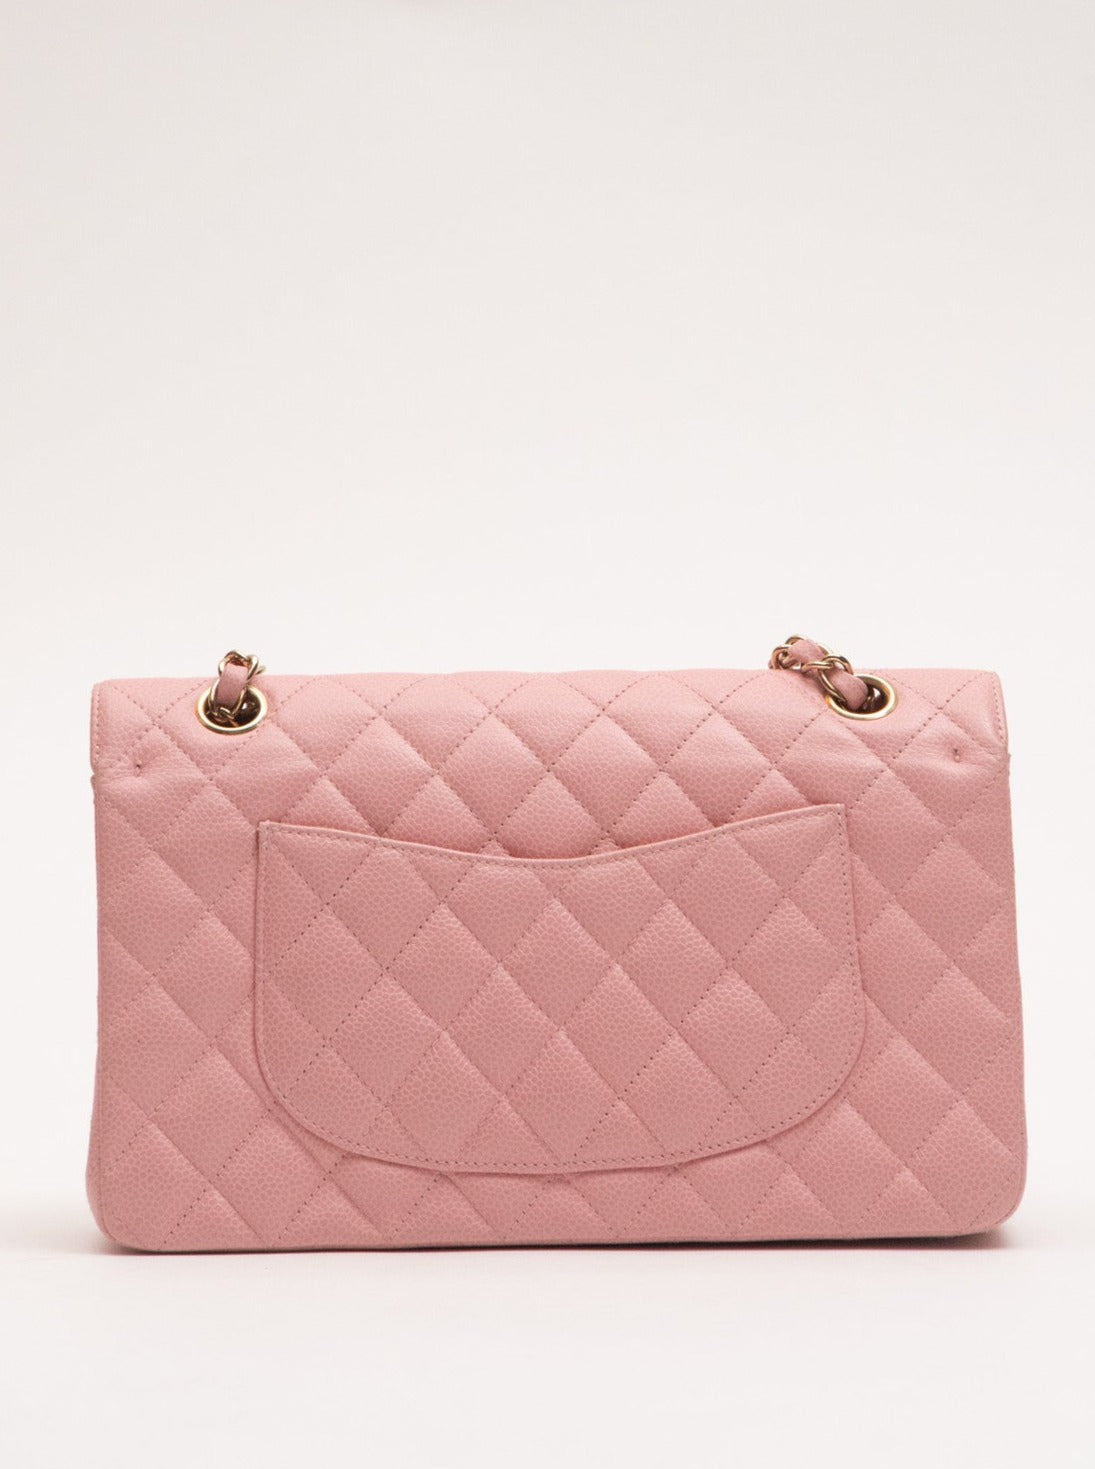 CHANEL-Matelasse-Caviar-Skin-Chain-Shoulder-Bag-Pink-Gold-A22476 –  dct-ep_vintage luxury Store